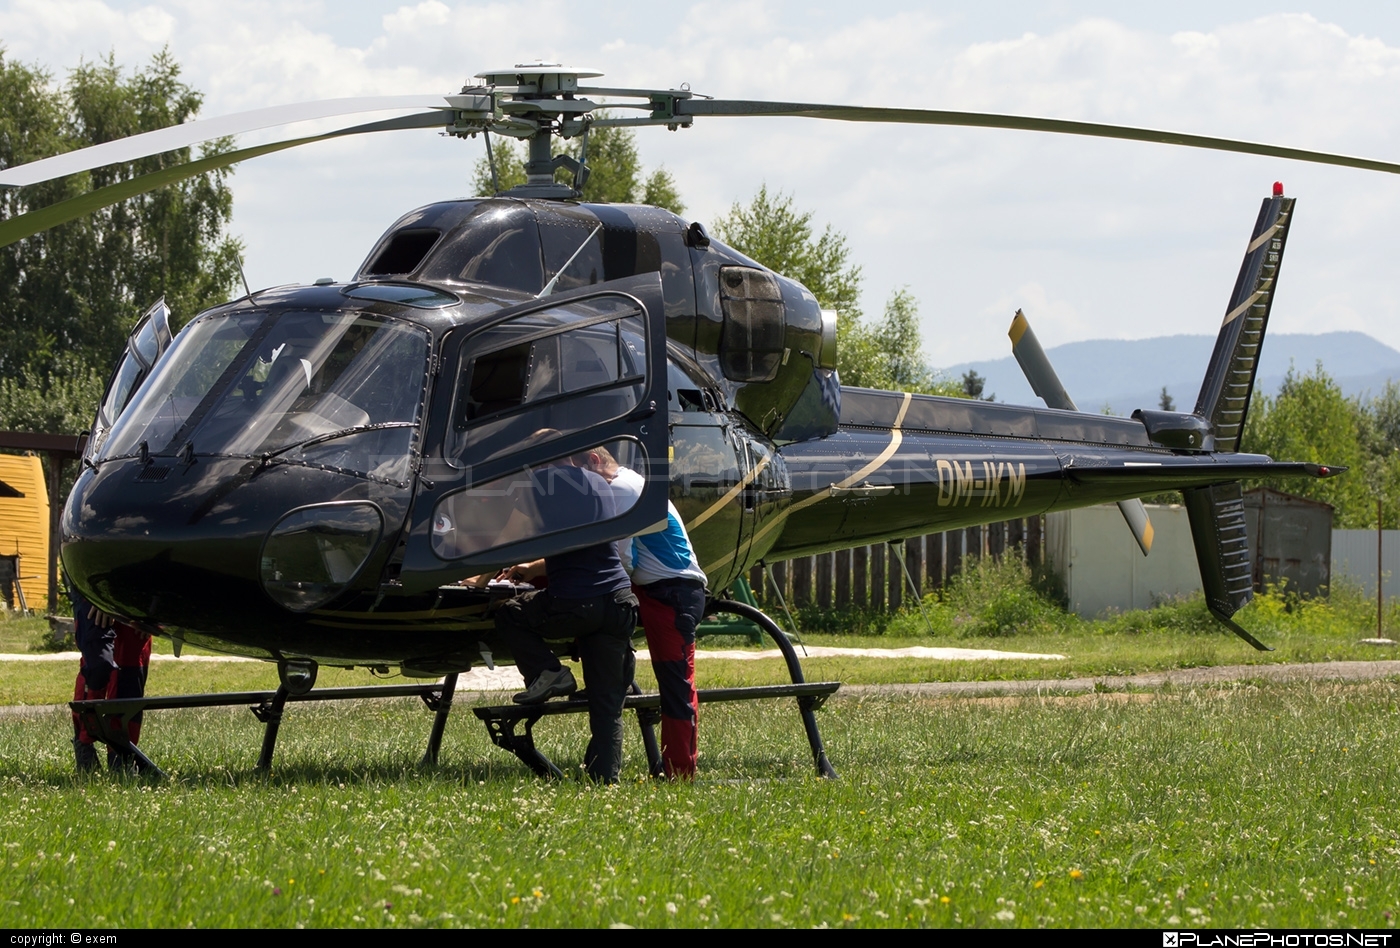 Eurocopter AS355 N Ecureuil 2 - OM-IKM operated by EHC Service #aerospatialeecureuil #as355 #as355ecureuil2 #as355n #as355necureuil2 #ecureuil2 #eurocopter #eurocopterecureuil